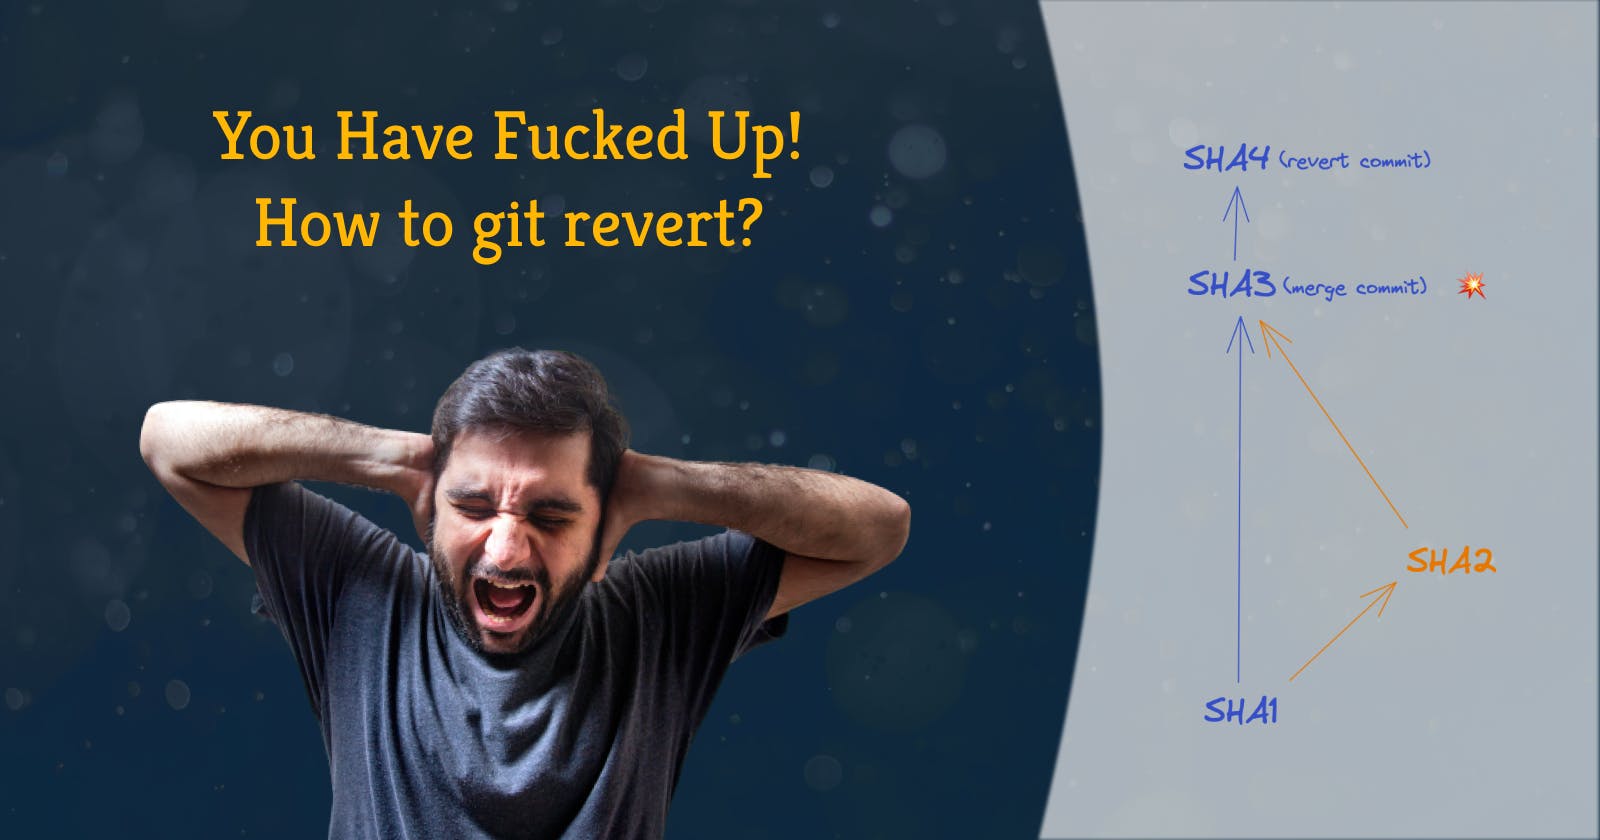 You Have Fucked Up! How to git revert?